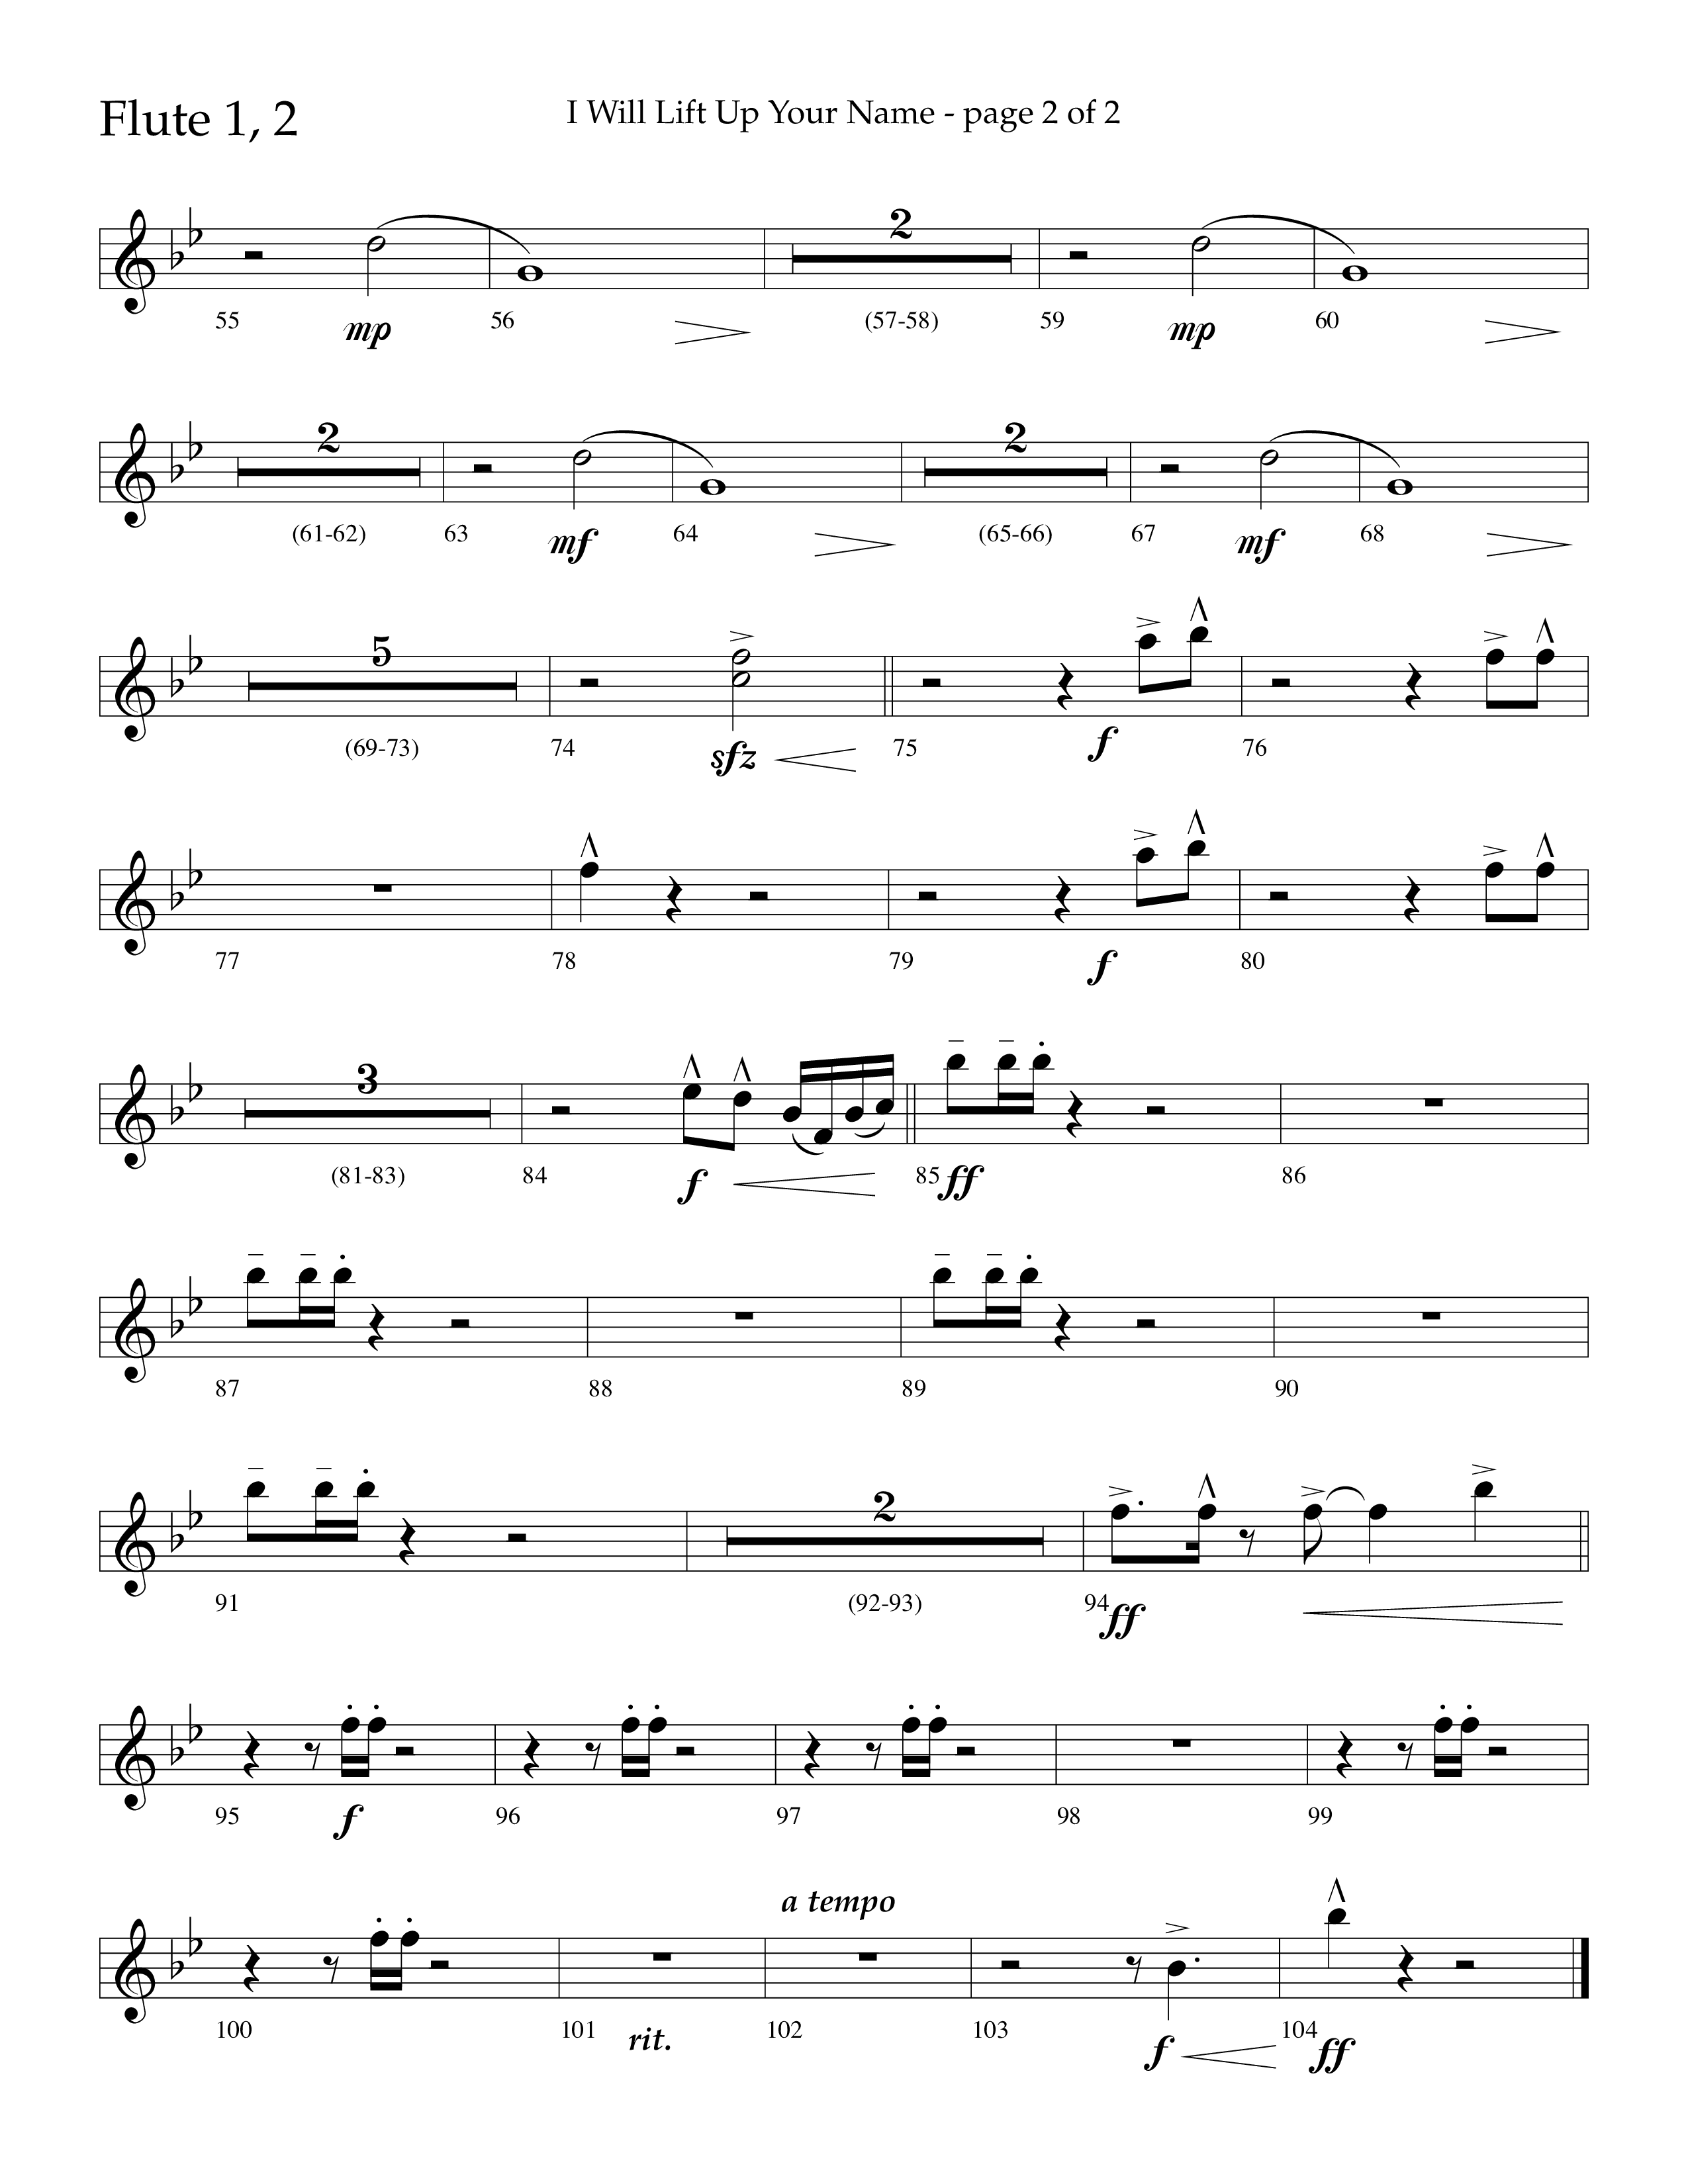 I Will Lift Up Your Name (Choral Anthem SATB) Flute 1/2 (Lifeway Choral / Arr. John Bolin / Orch. Cliff Duren)